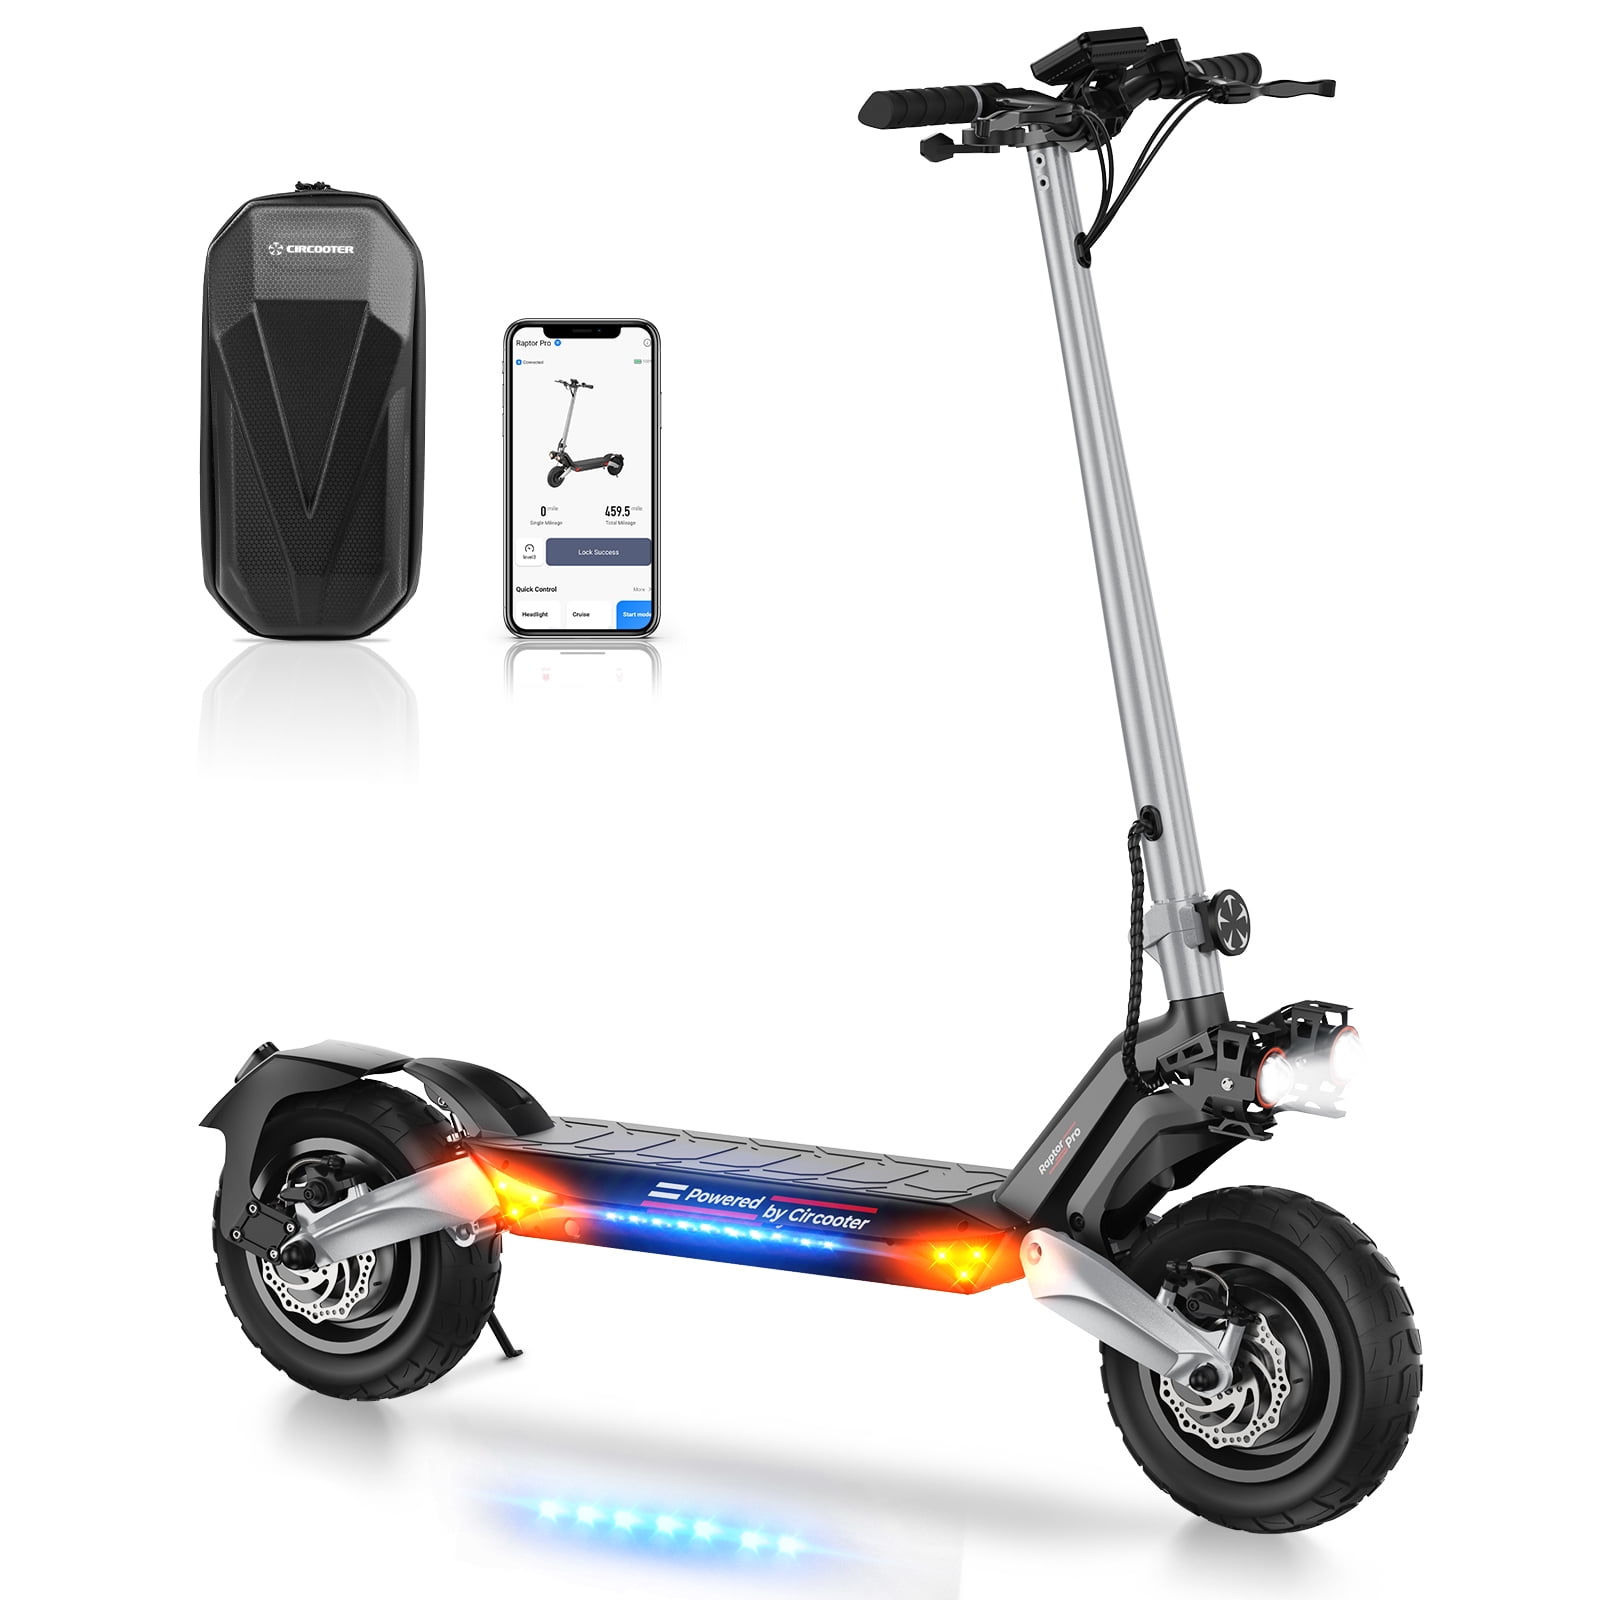 Circooter RaptorPro Electric Scooter，800W Motor,Up to 25 Miles Range,Top 28 MPH,Quick Folding, Electric Scooter for Adults with Dual Braking System, Off Road with Long Range Battery - Walmart.com